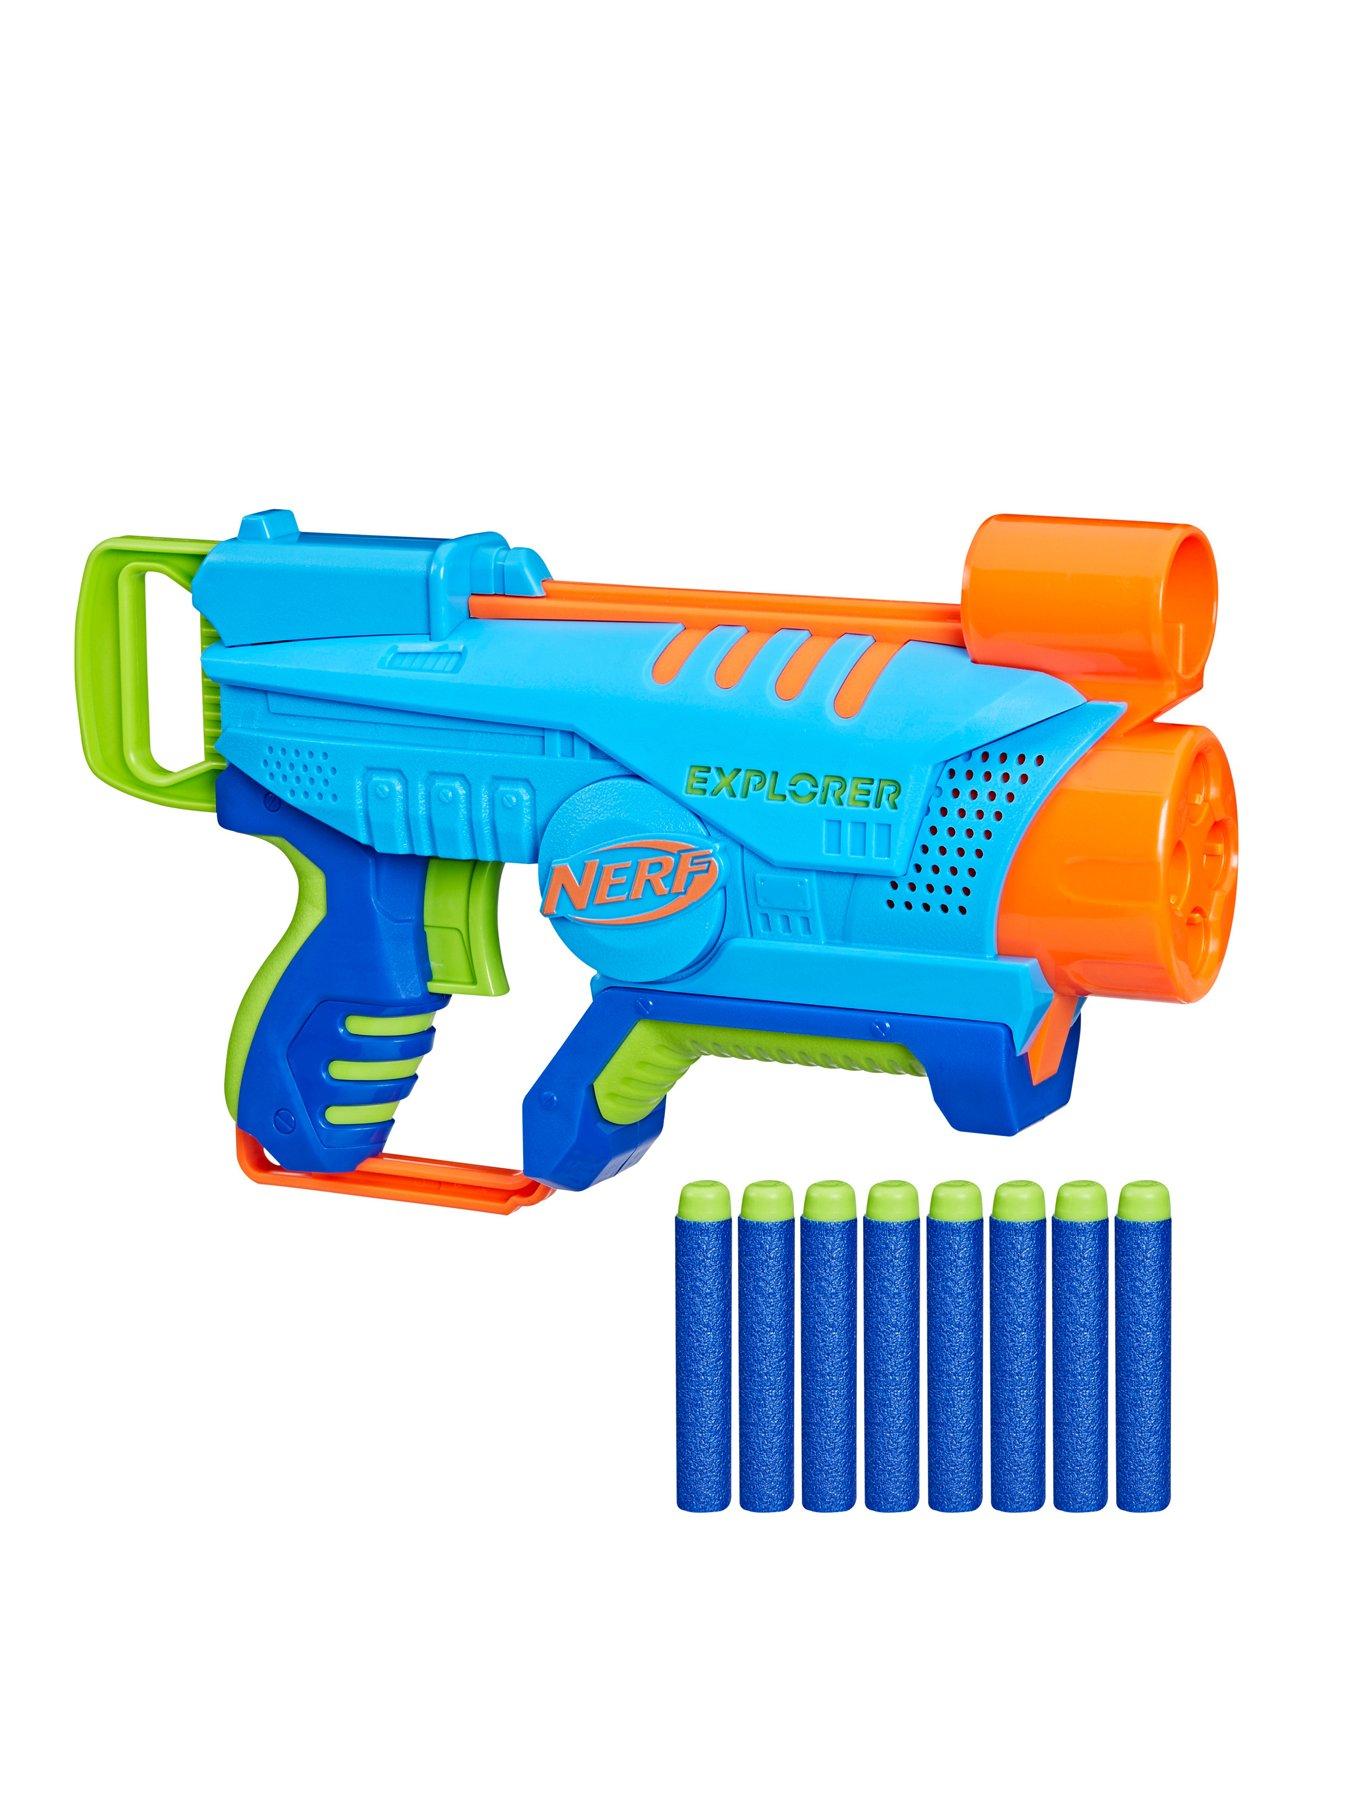 All Offers, Nerf, Toys